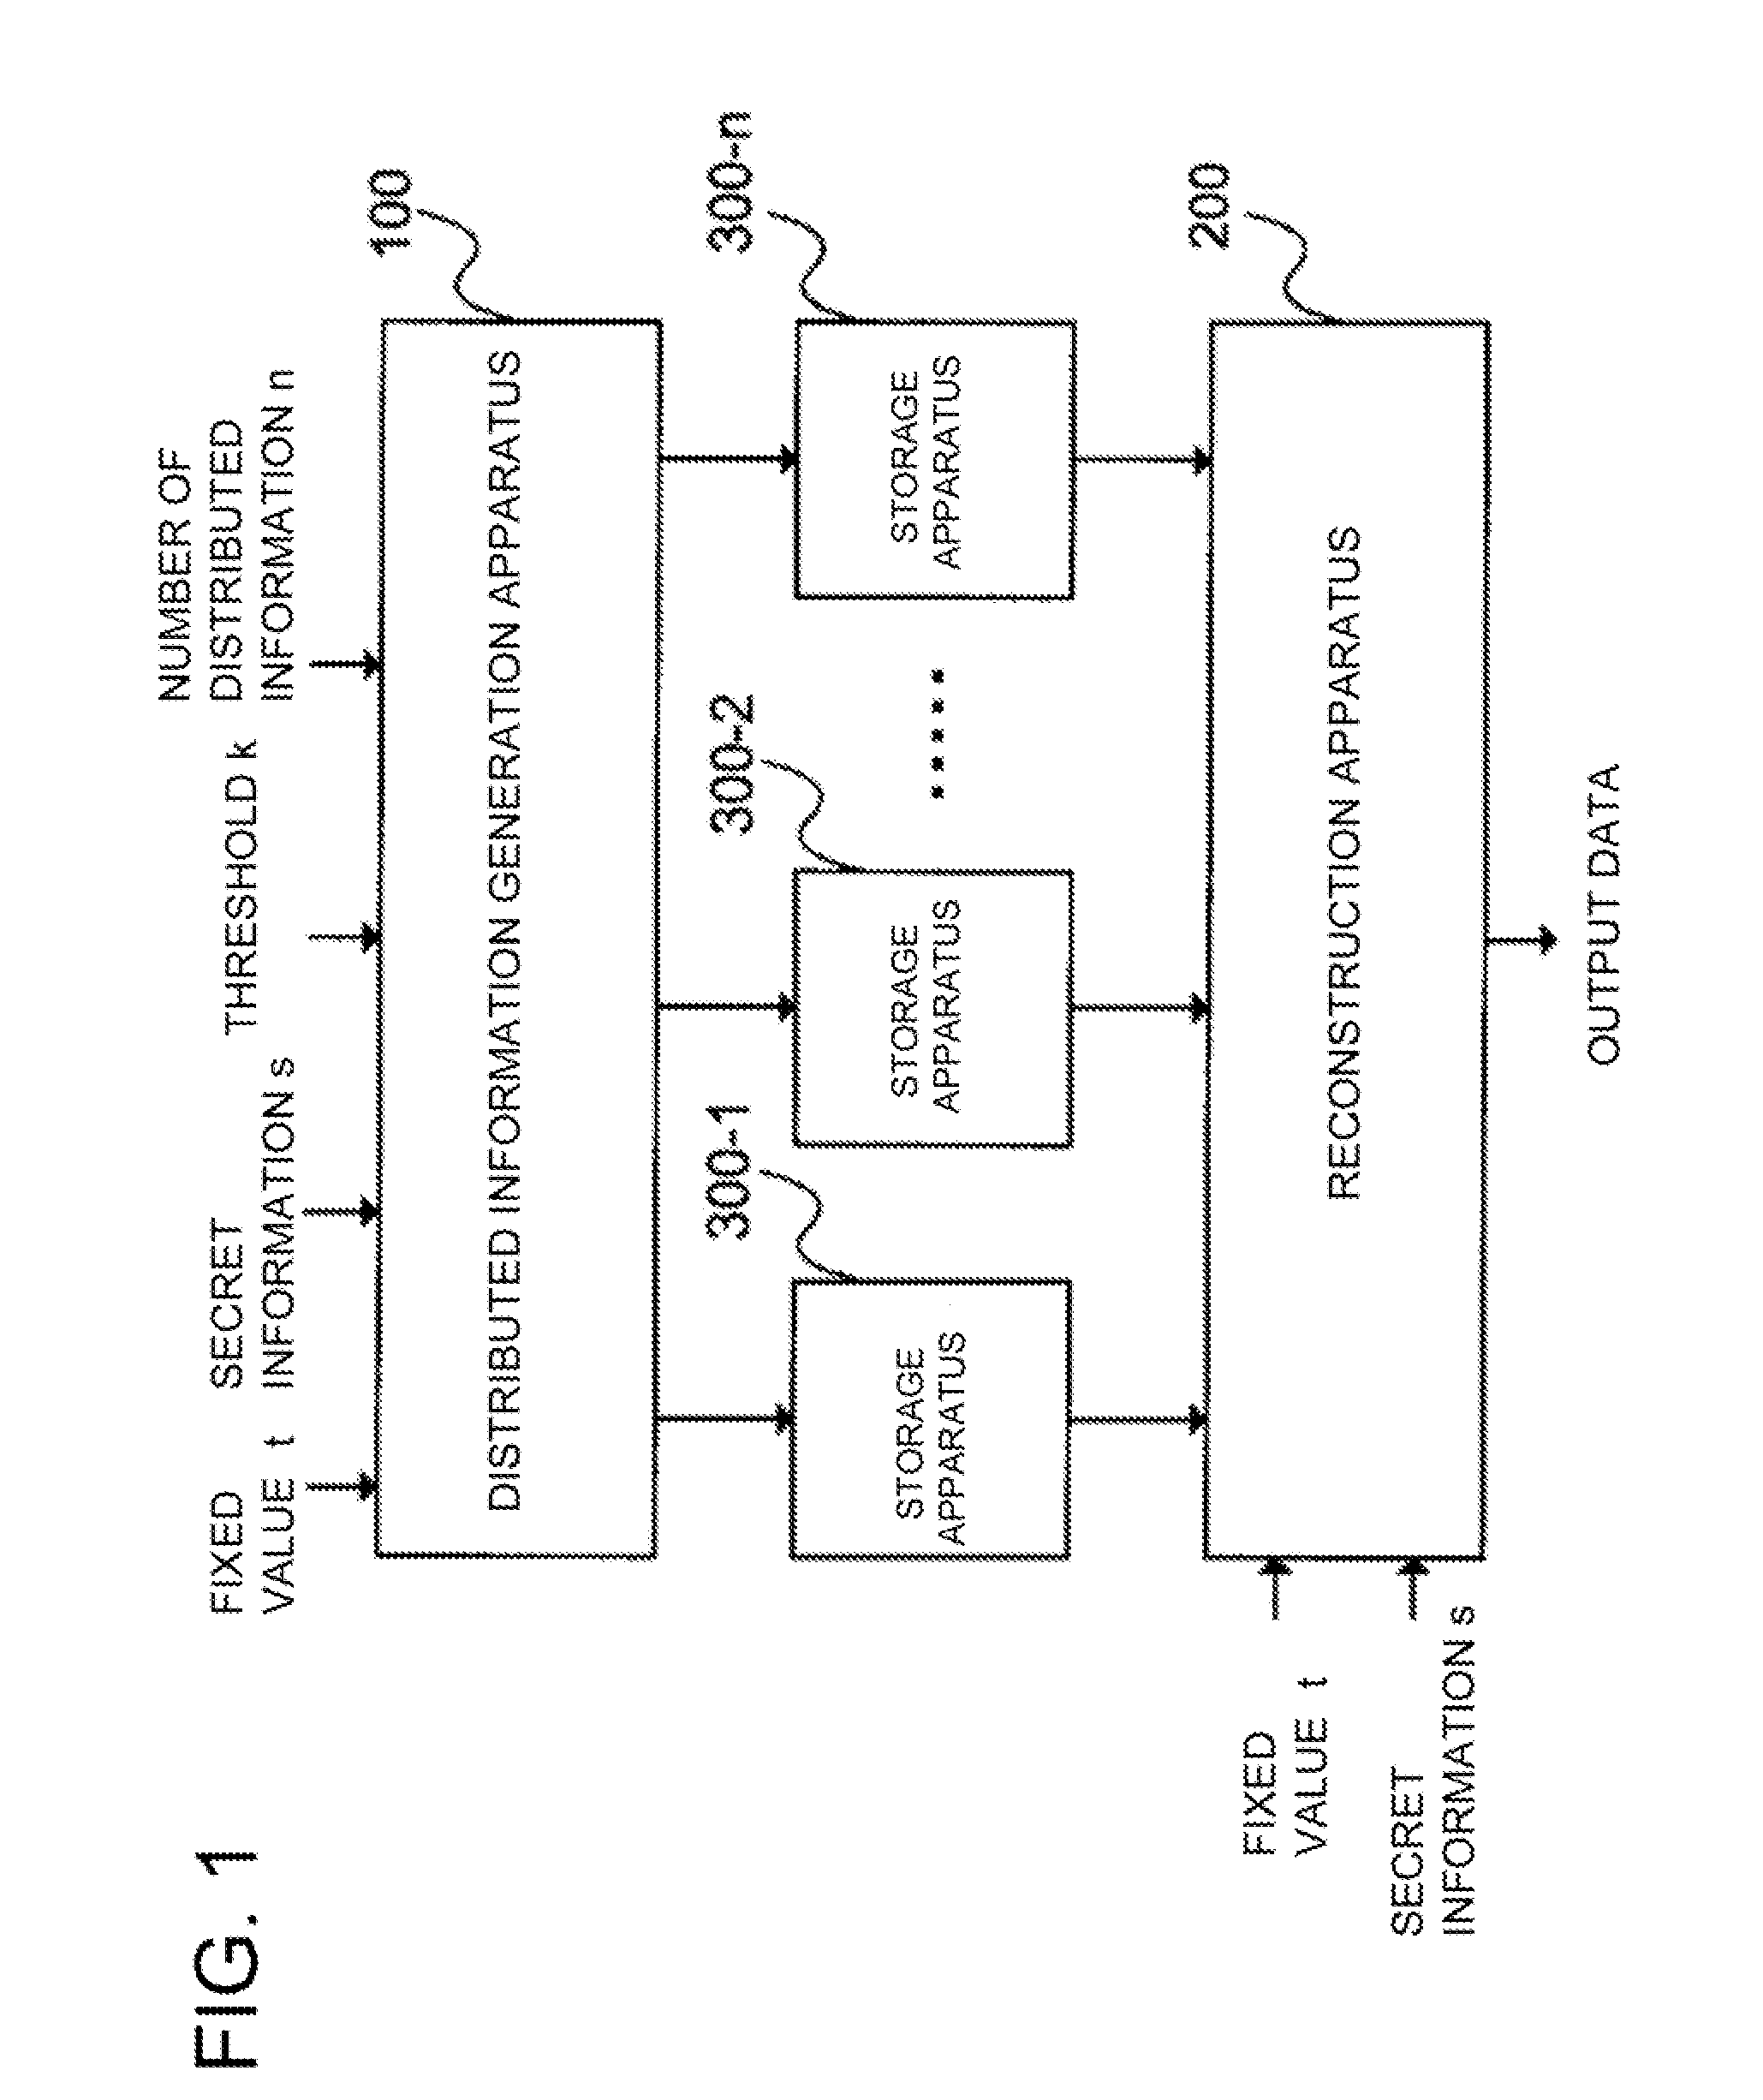 Distributed information generation apparatus, reconstruction apparatus, reconstruction result verification apparatus, and secret information distribution system, method, and program